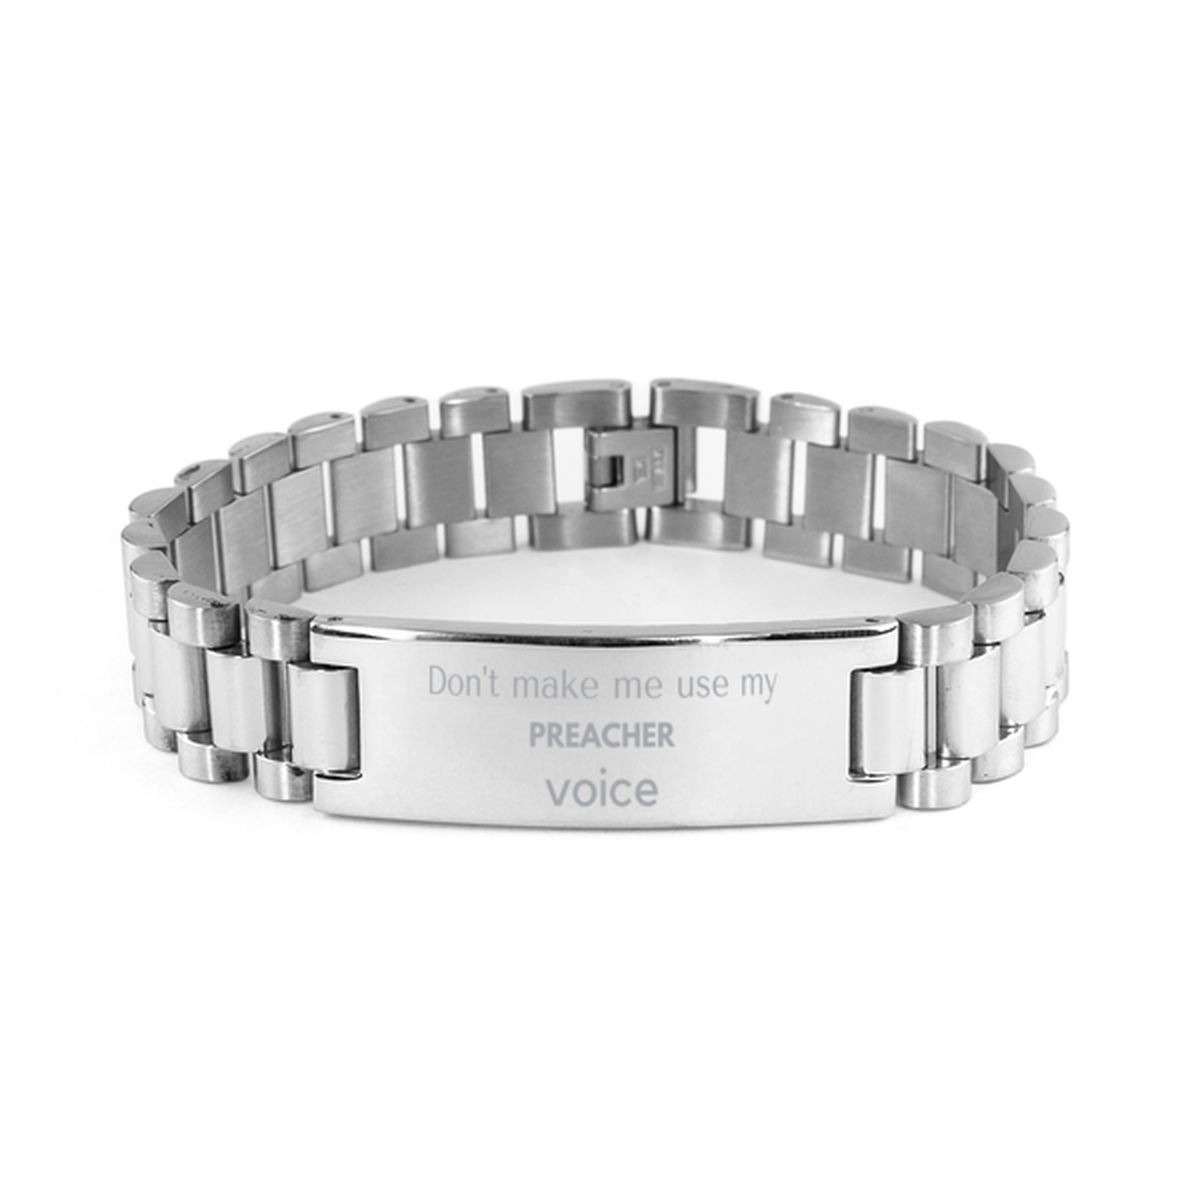 Don't make me use my Preacher voice, Sarcasm Preacher Gifts, Christmas Preacher Ladder Stainless Steel Bracelet Birthday Unique Gifts For Preacher Coworkers, Men, Women, Colleague, Friends